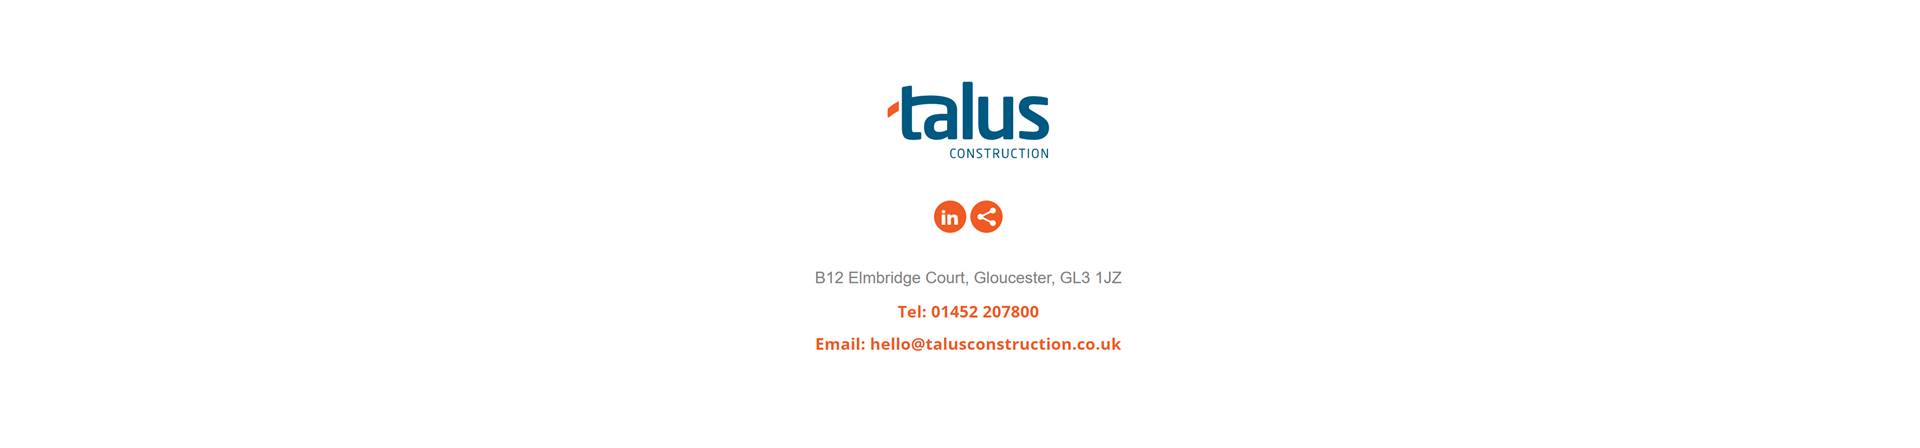 Frontend & backend development of Talus construction a responsive website built by Hussein Khraibani - Footer Section